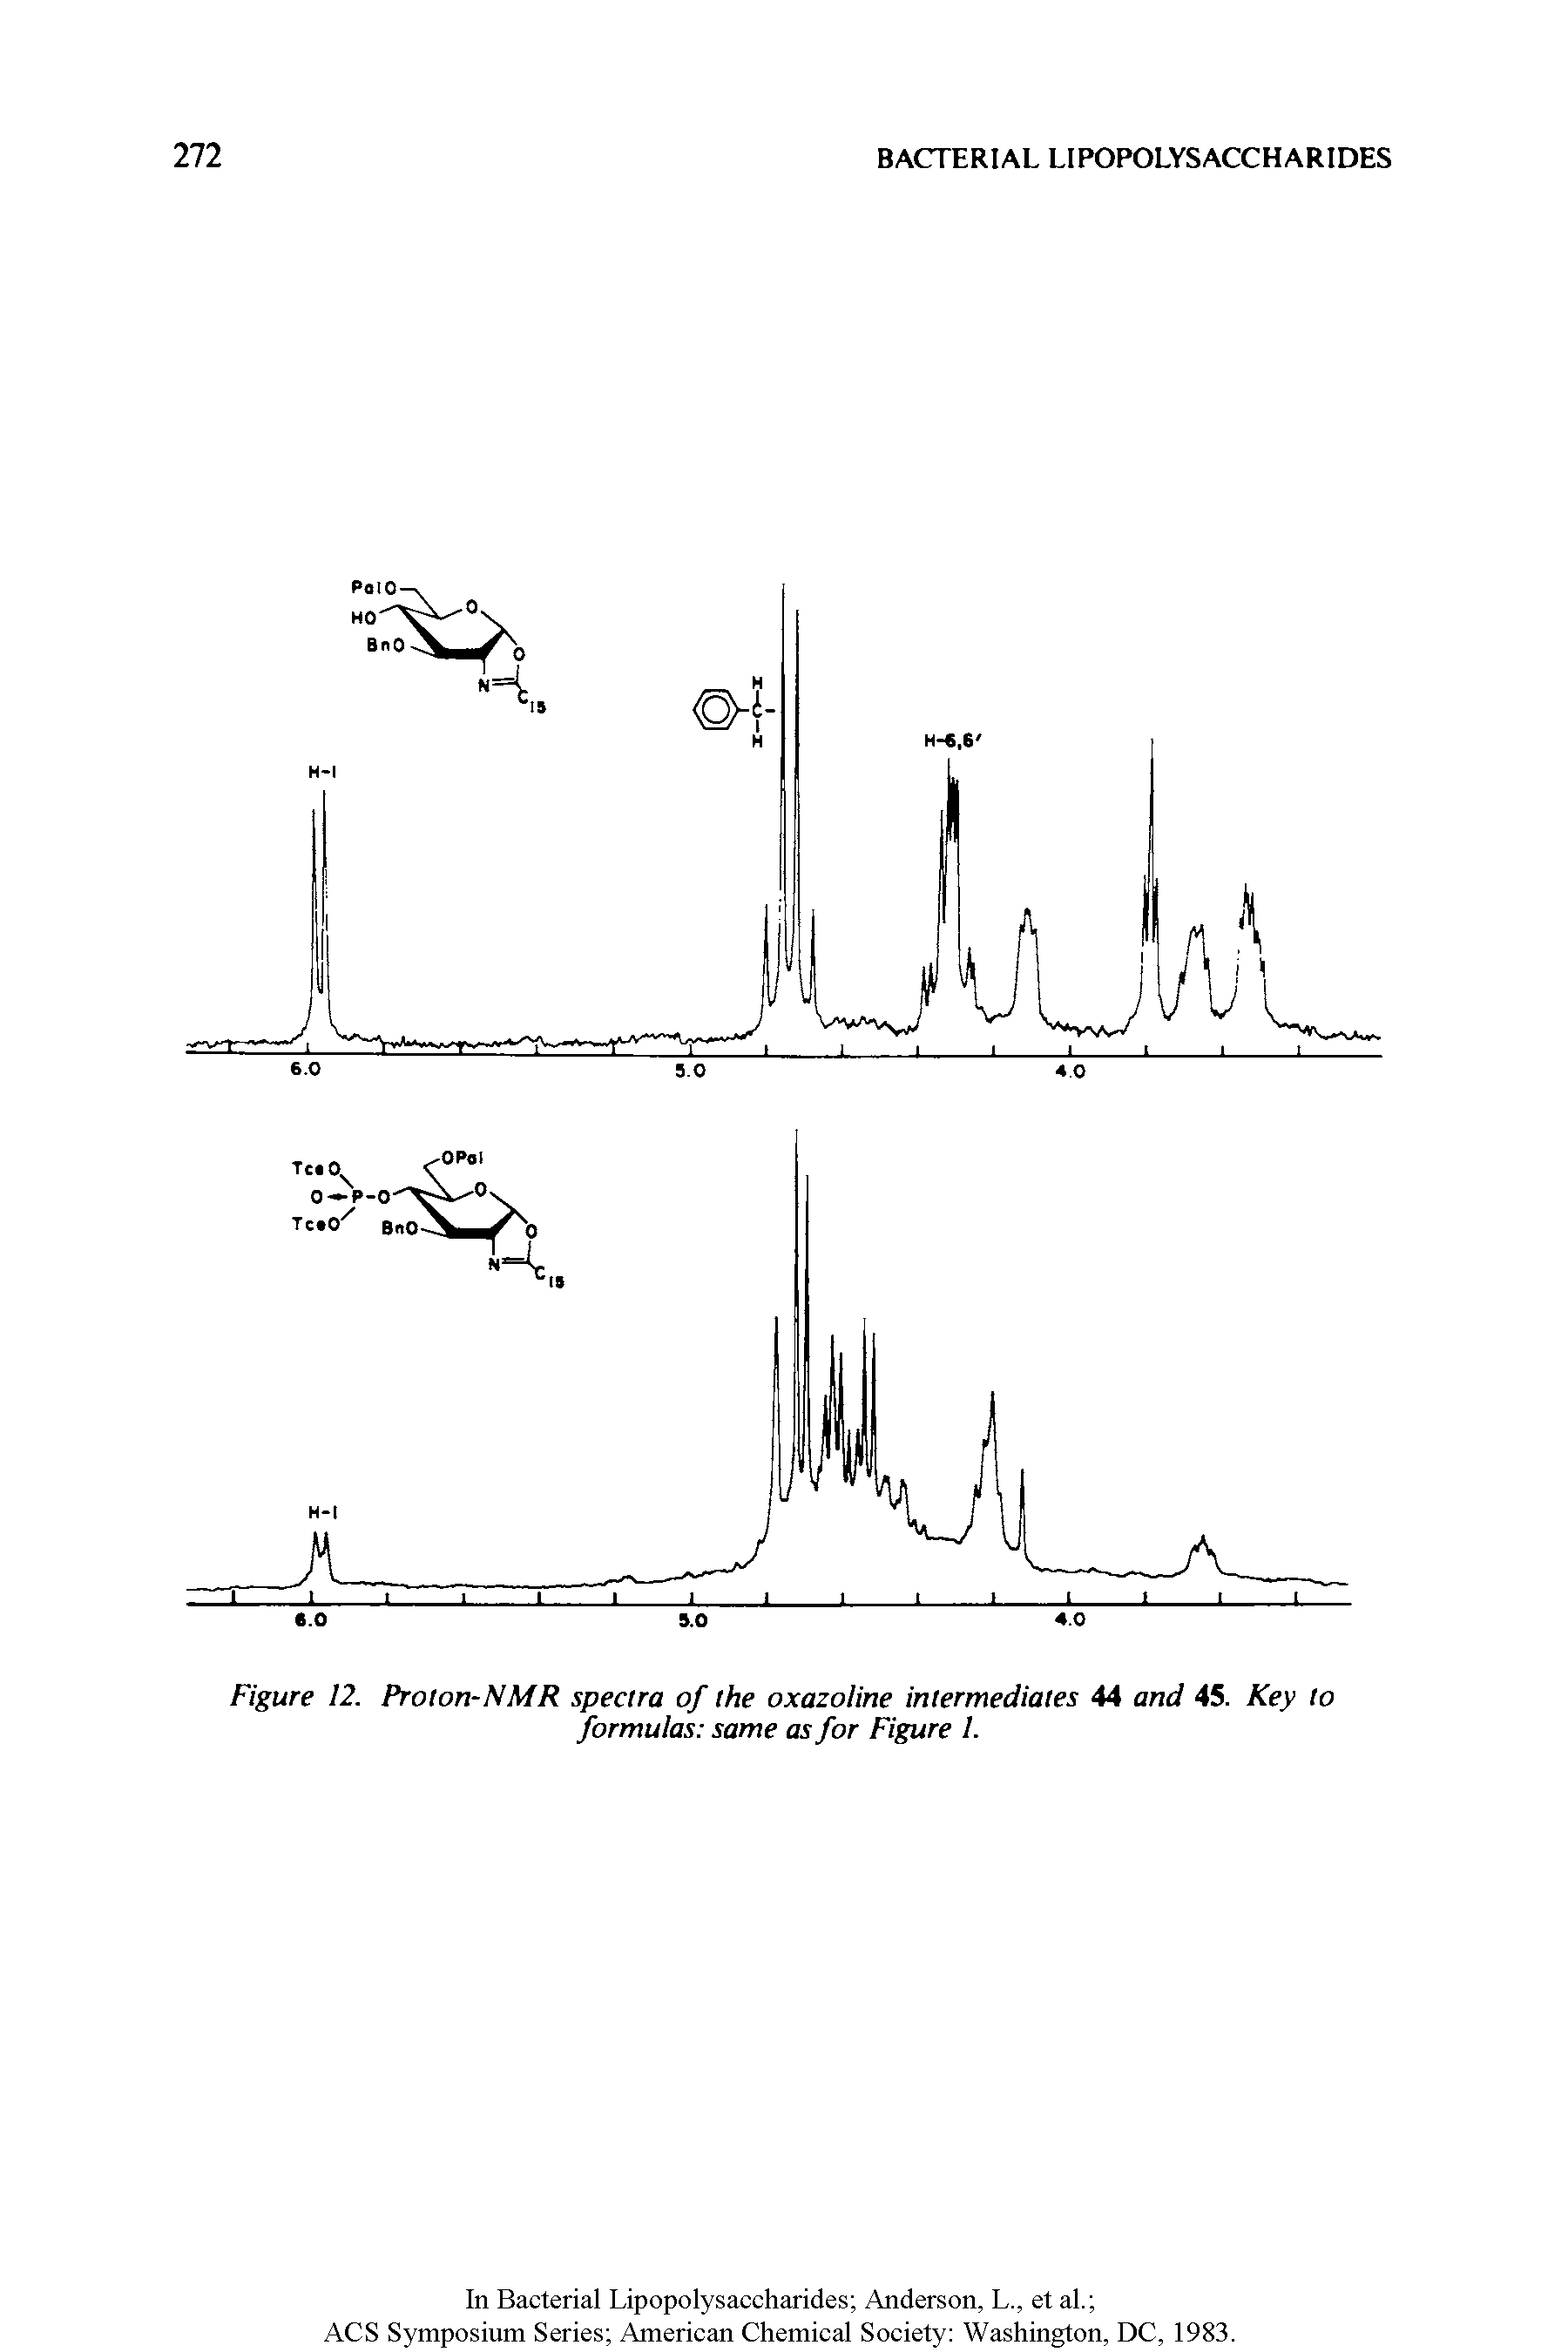 Figure 12. Proton-NMR spectra of the oxazoline intermediates 44 and 45. Key to formulas same as for Figure 1.